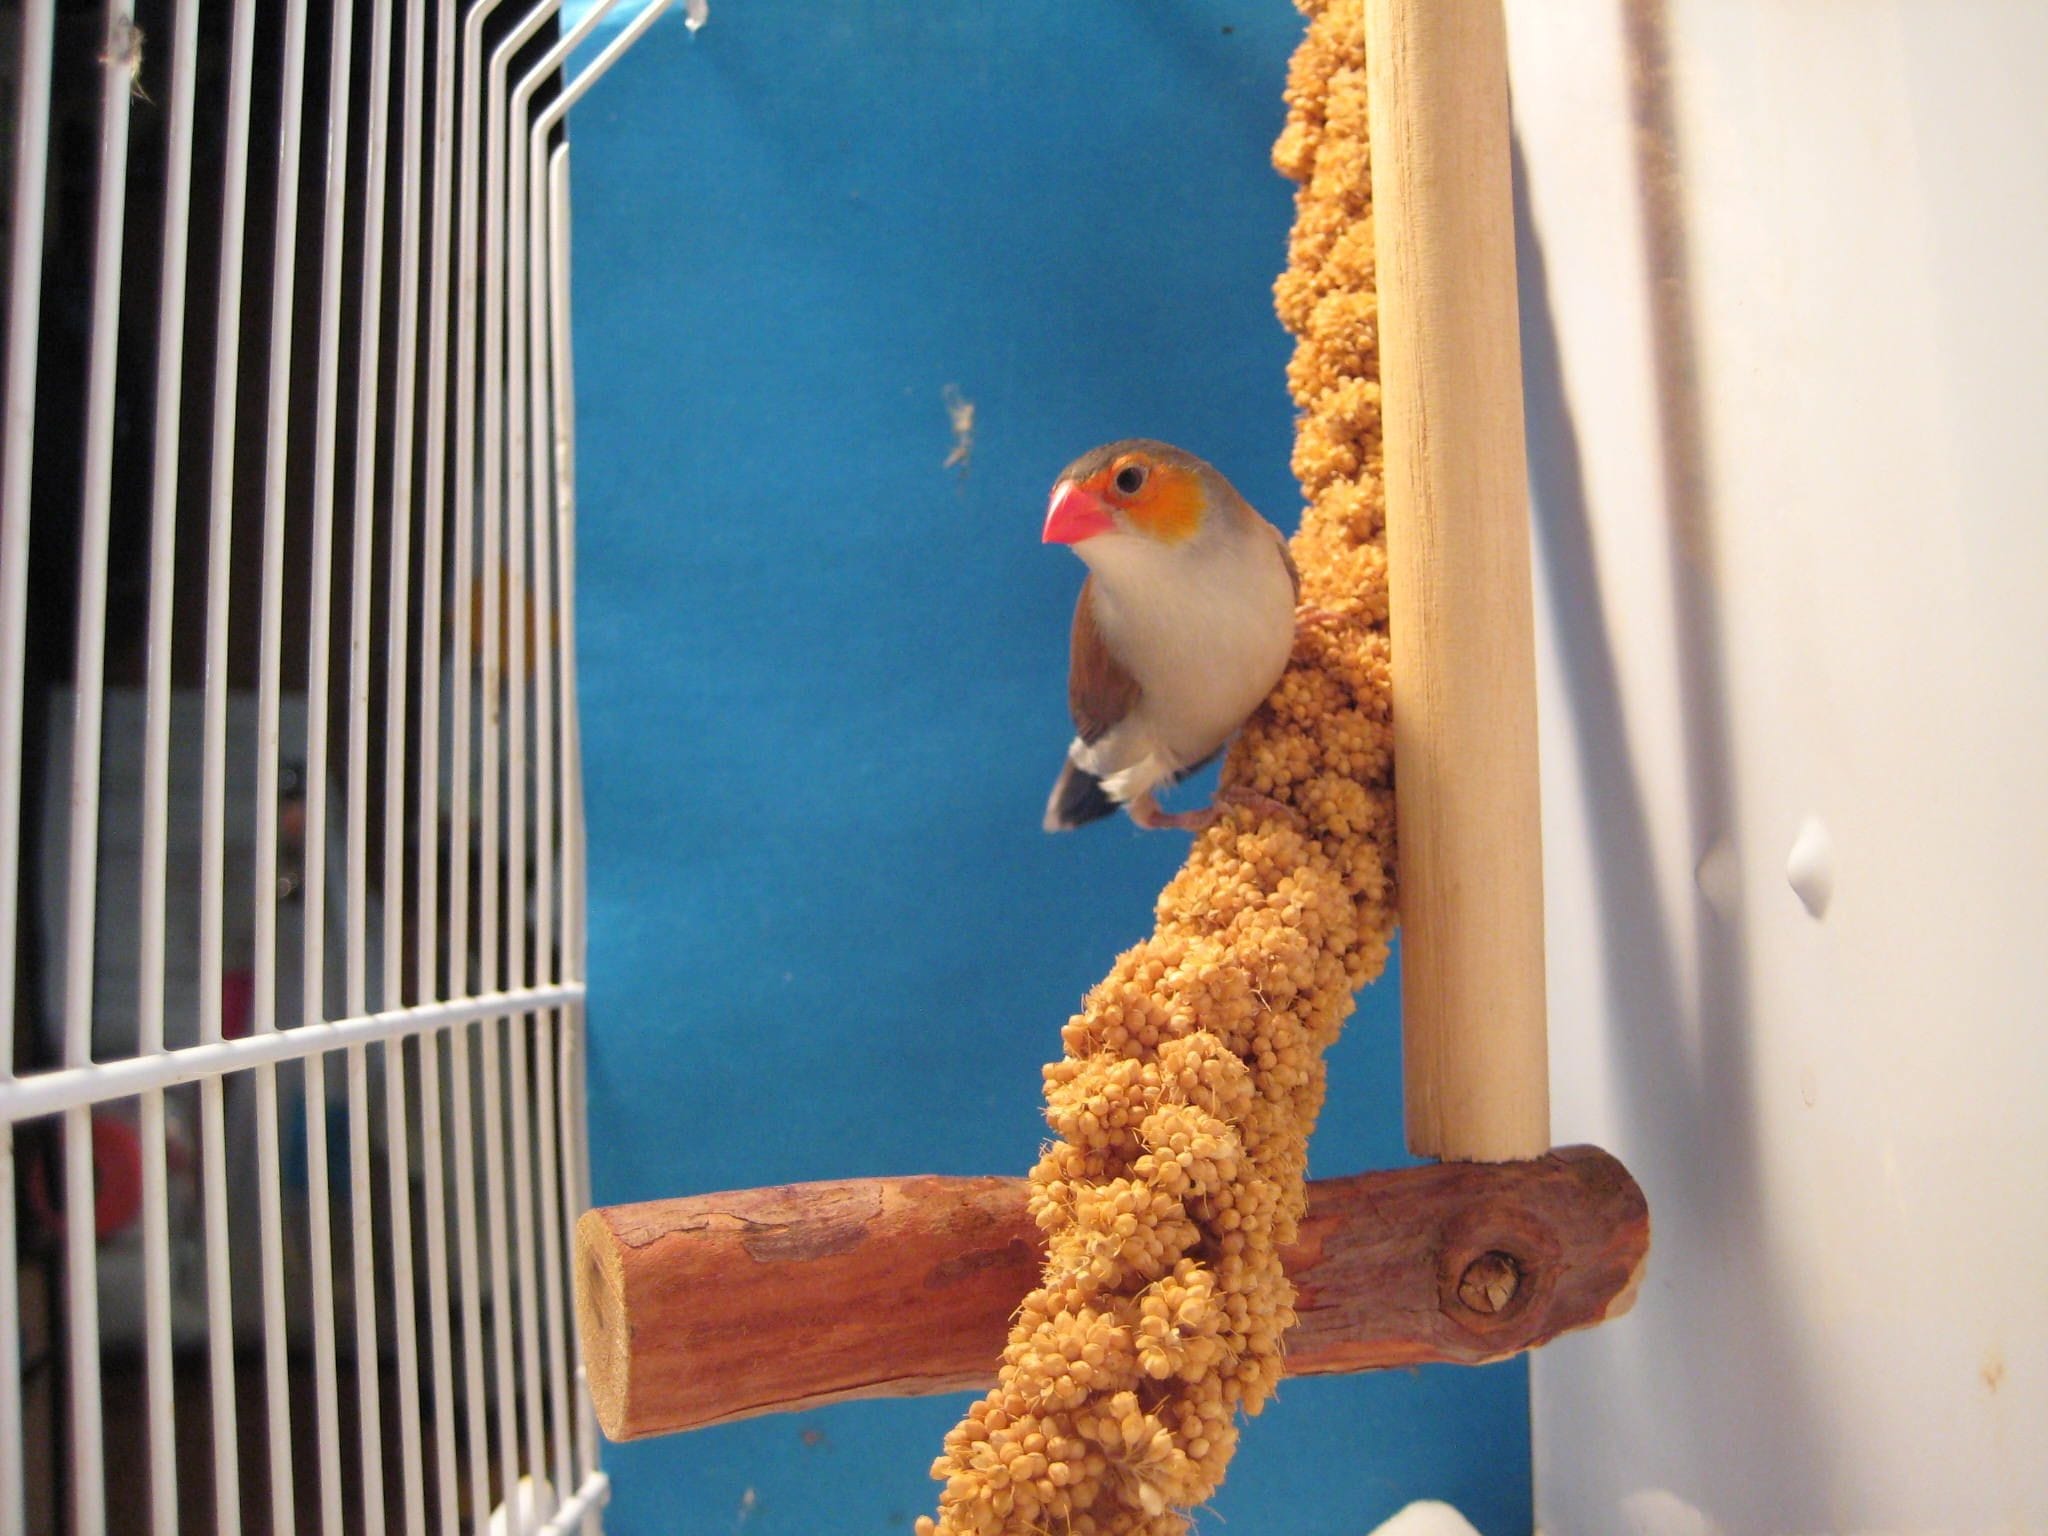 ORANGE CHEEKED WAXBILL - finches for sale in houston texas